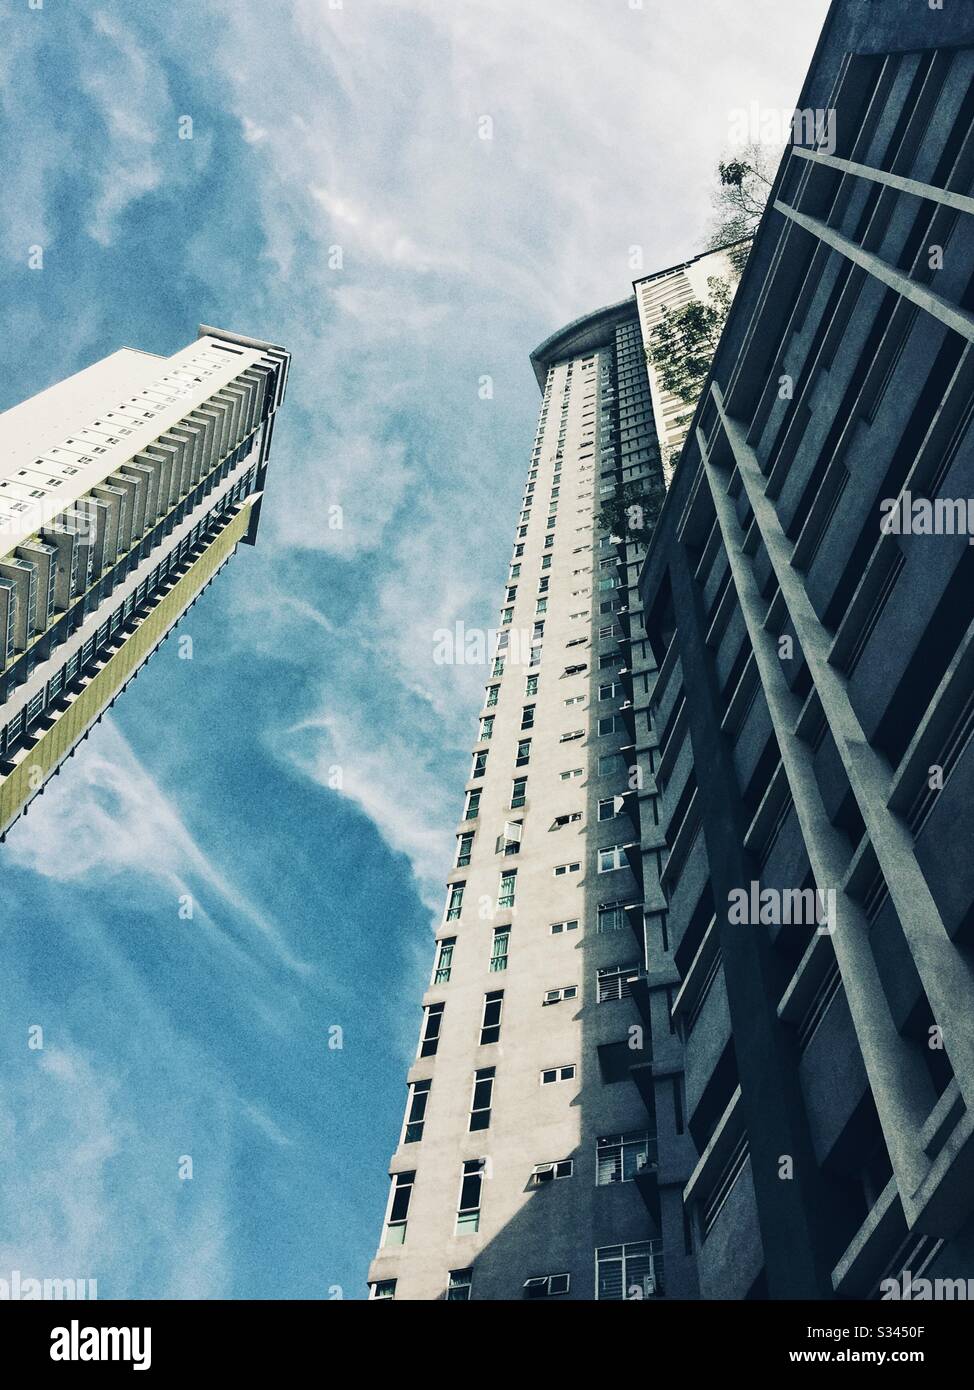 New high-rise buildings in penang. Stock Photo